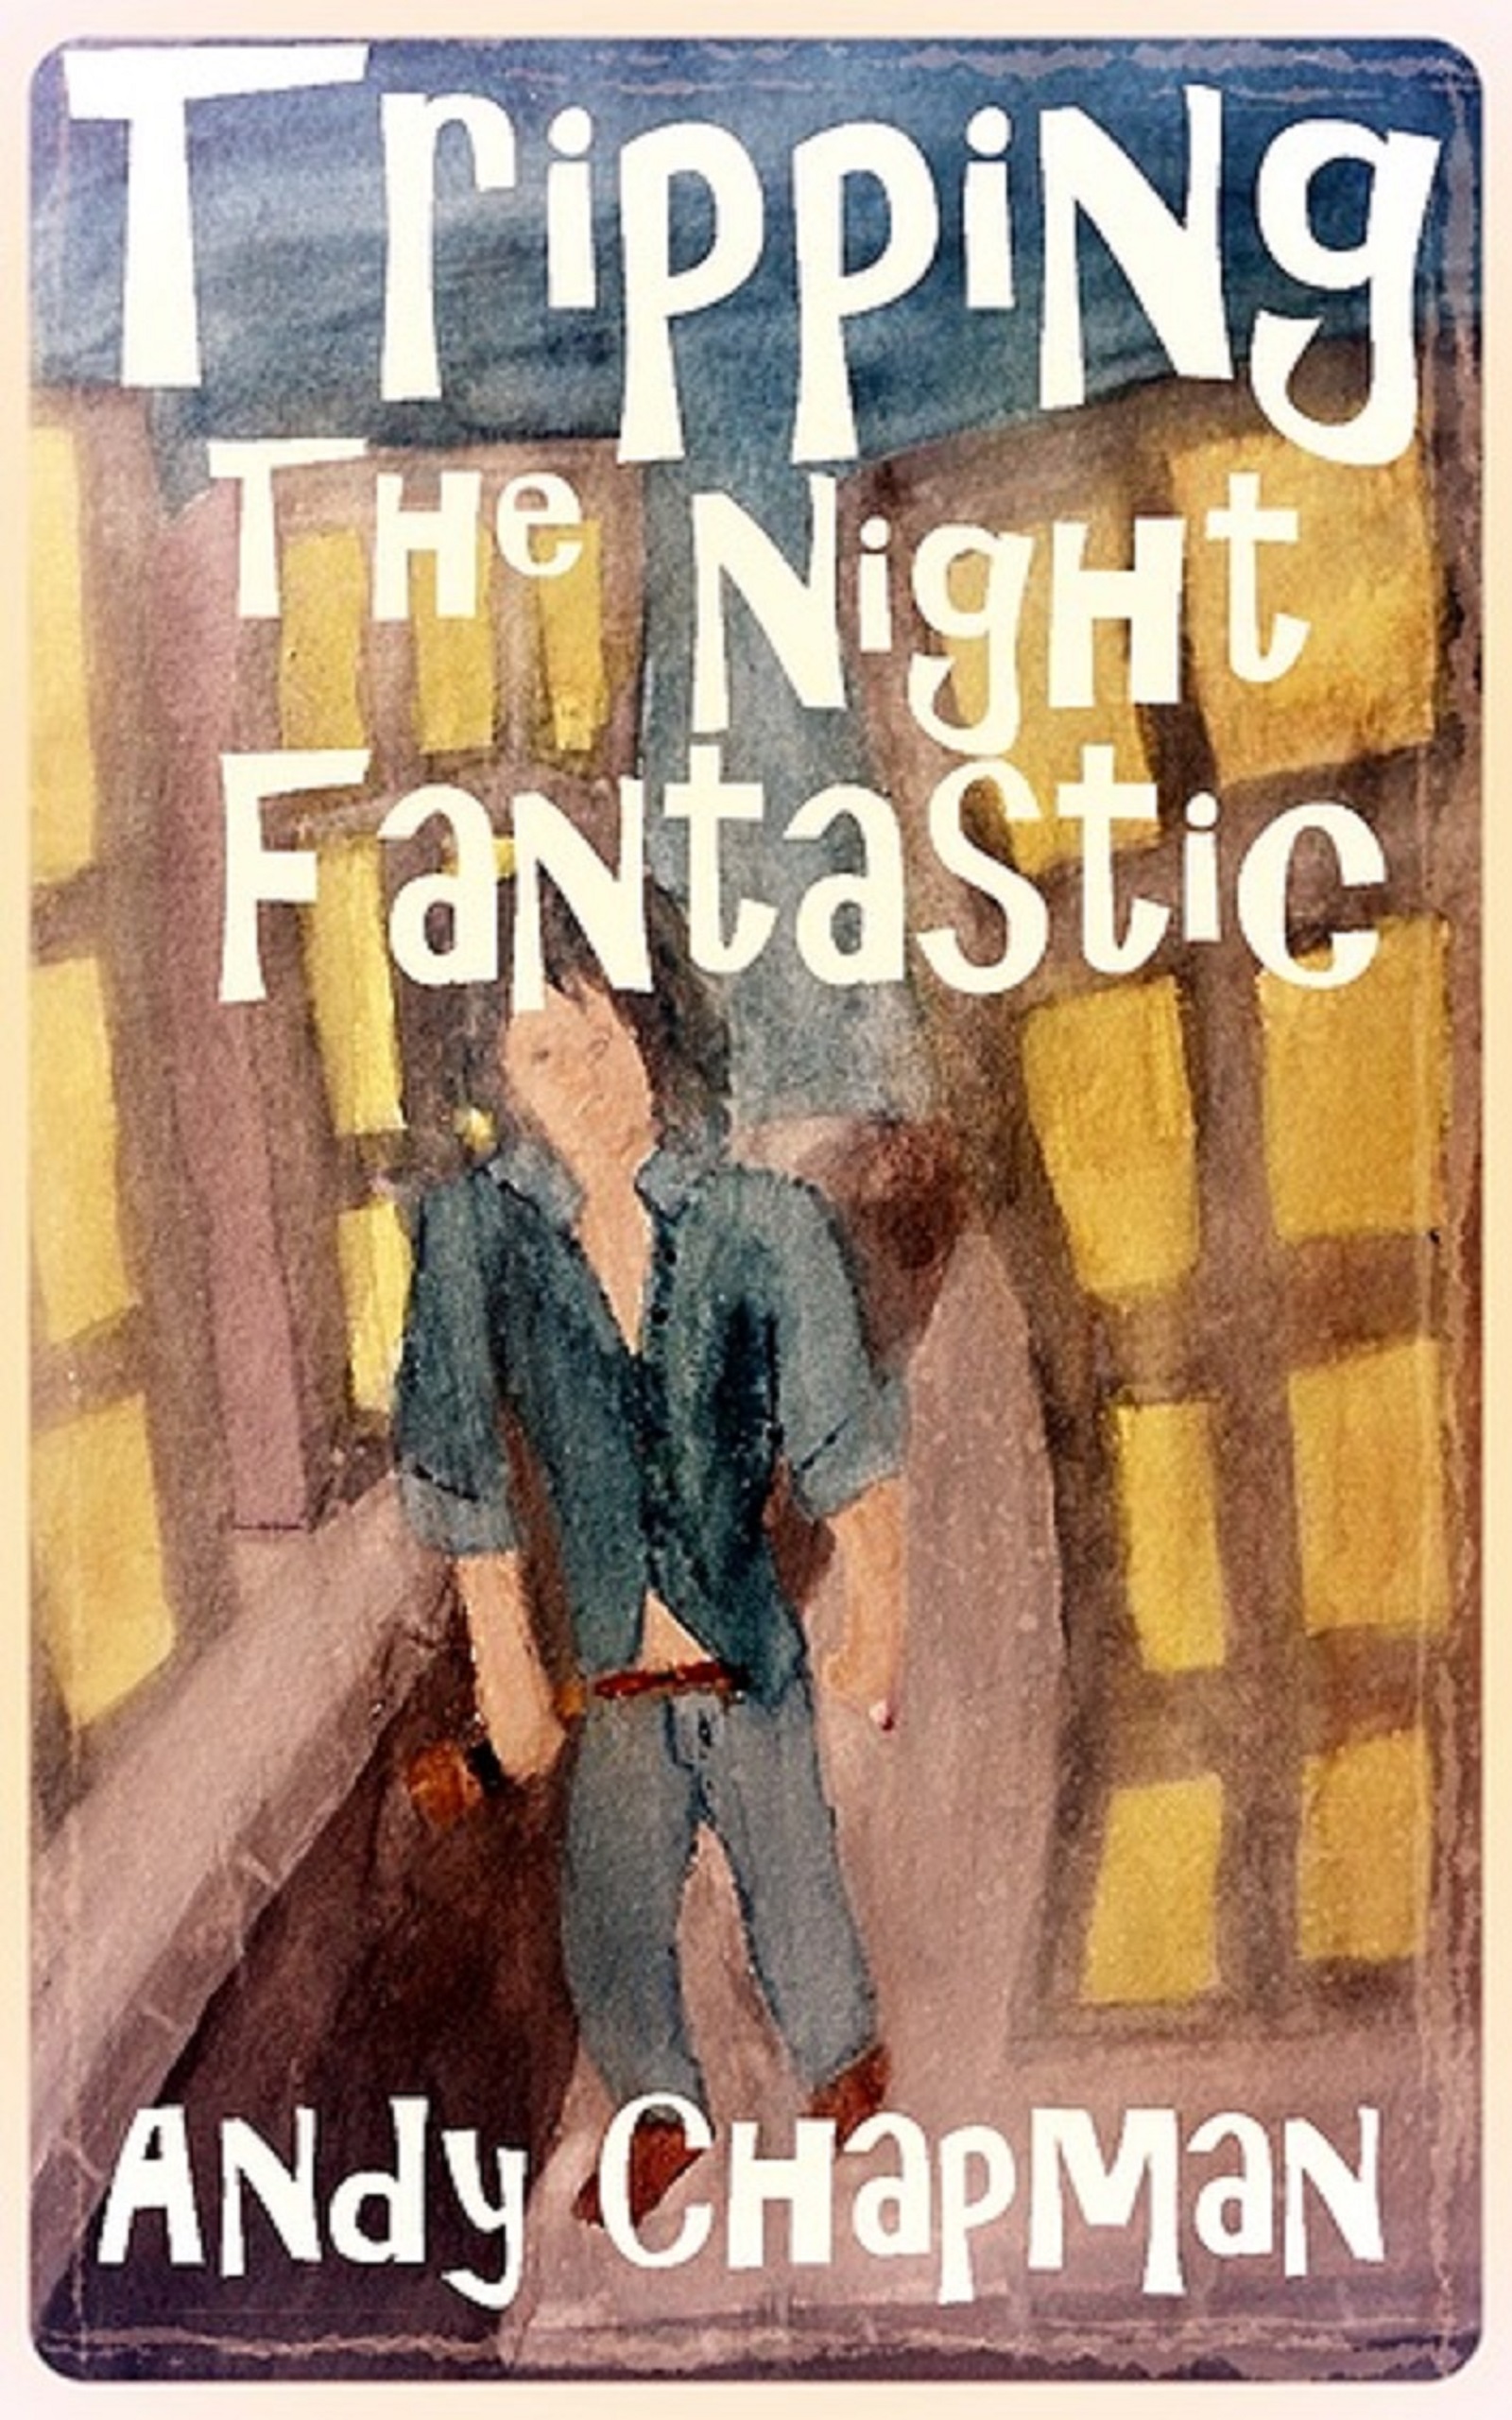 FREE: Tripping the Night Fantastic by Andrew Chapman